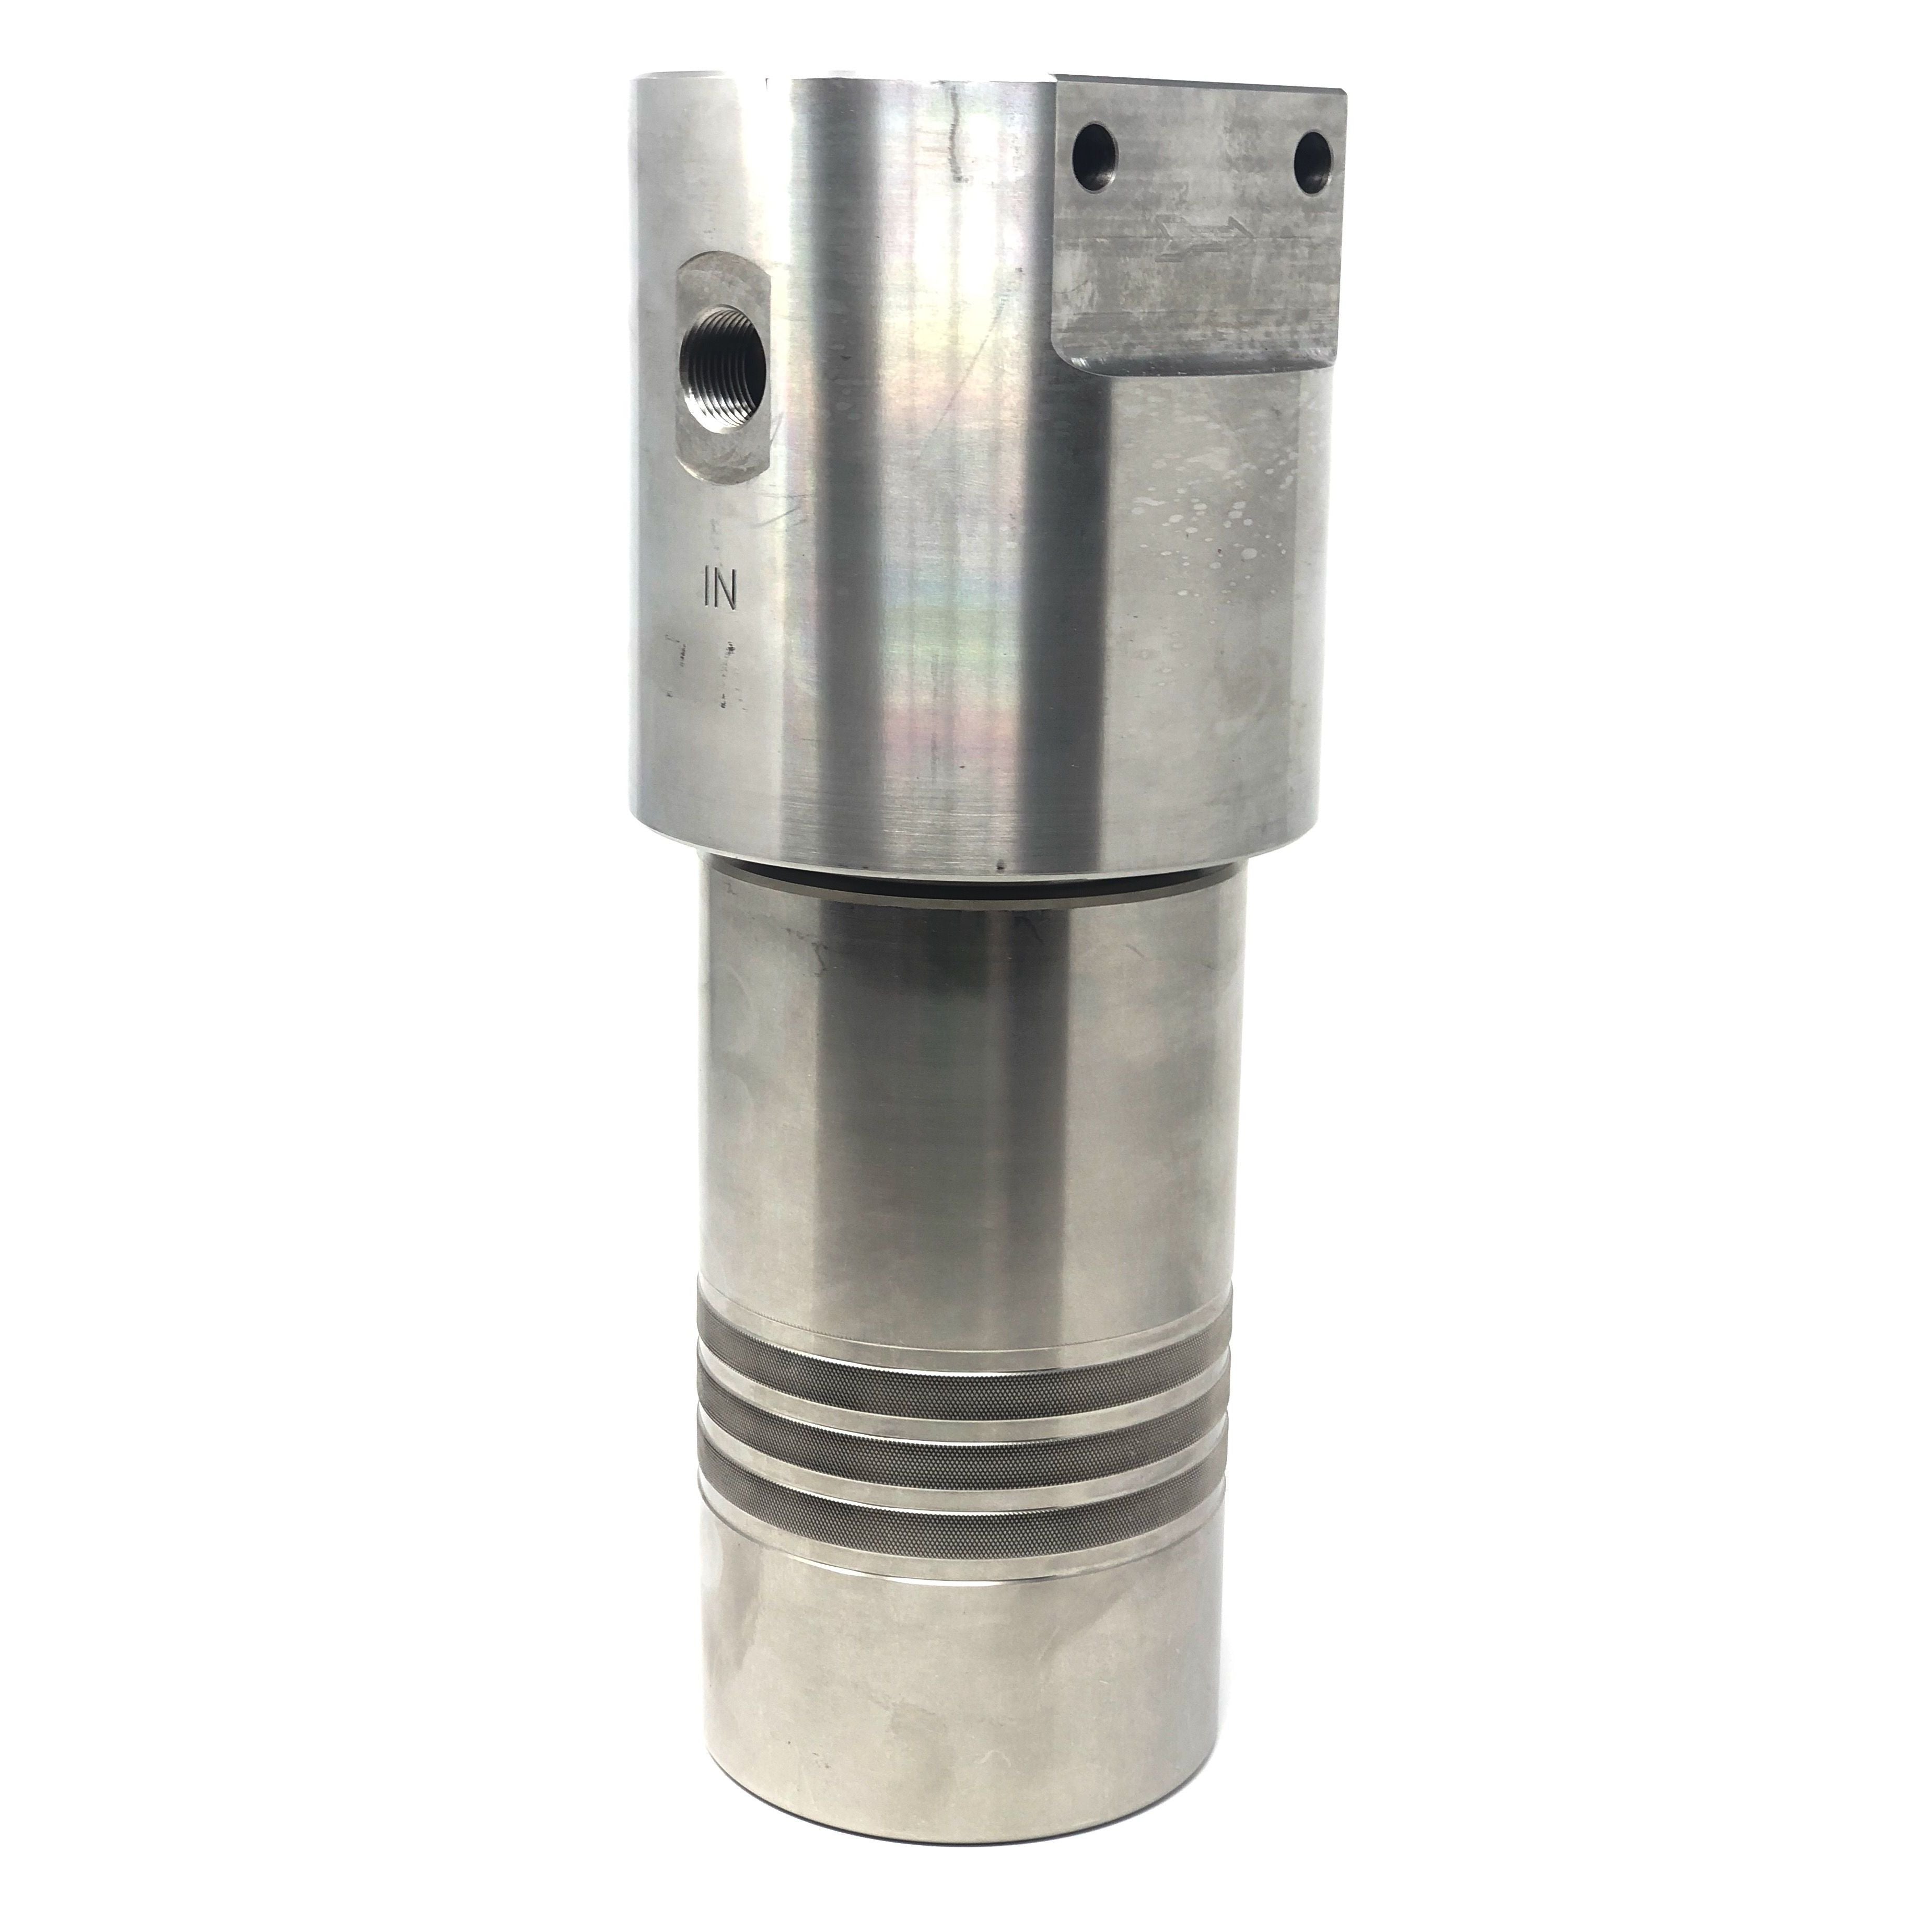 52S-104N-18SEN : Chase Ultra High Pressure Inline Filter, 10000psi, 1/4" NPT, 18 Micron, With Visual Indicator, No Bypass